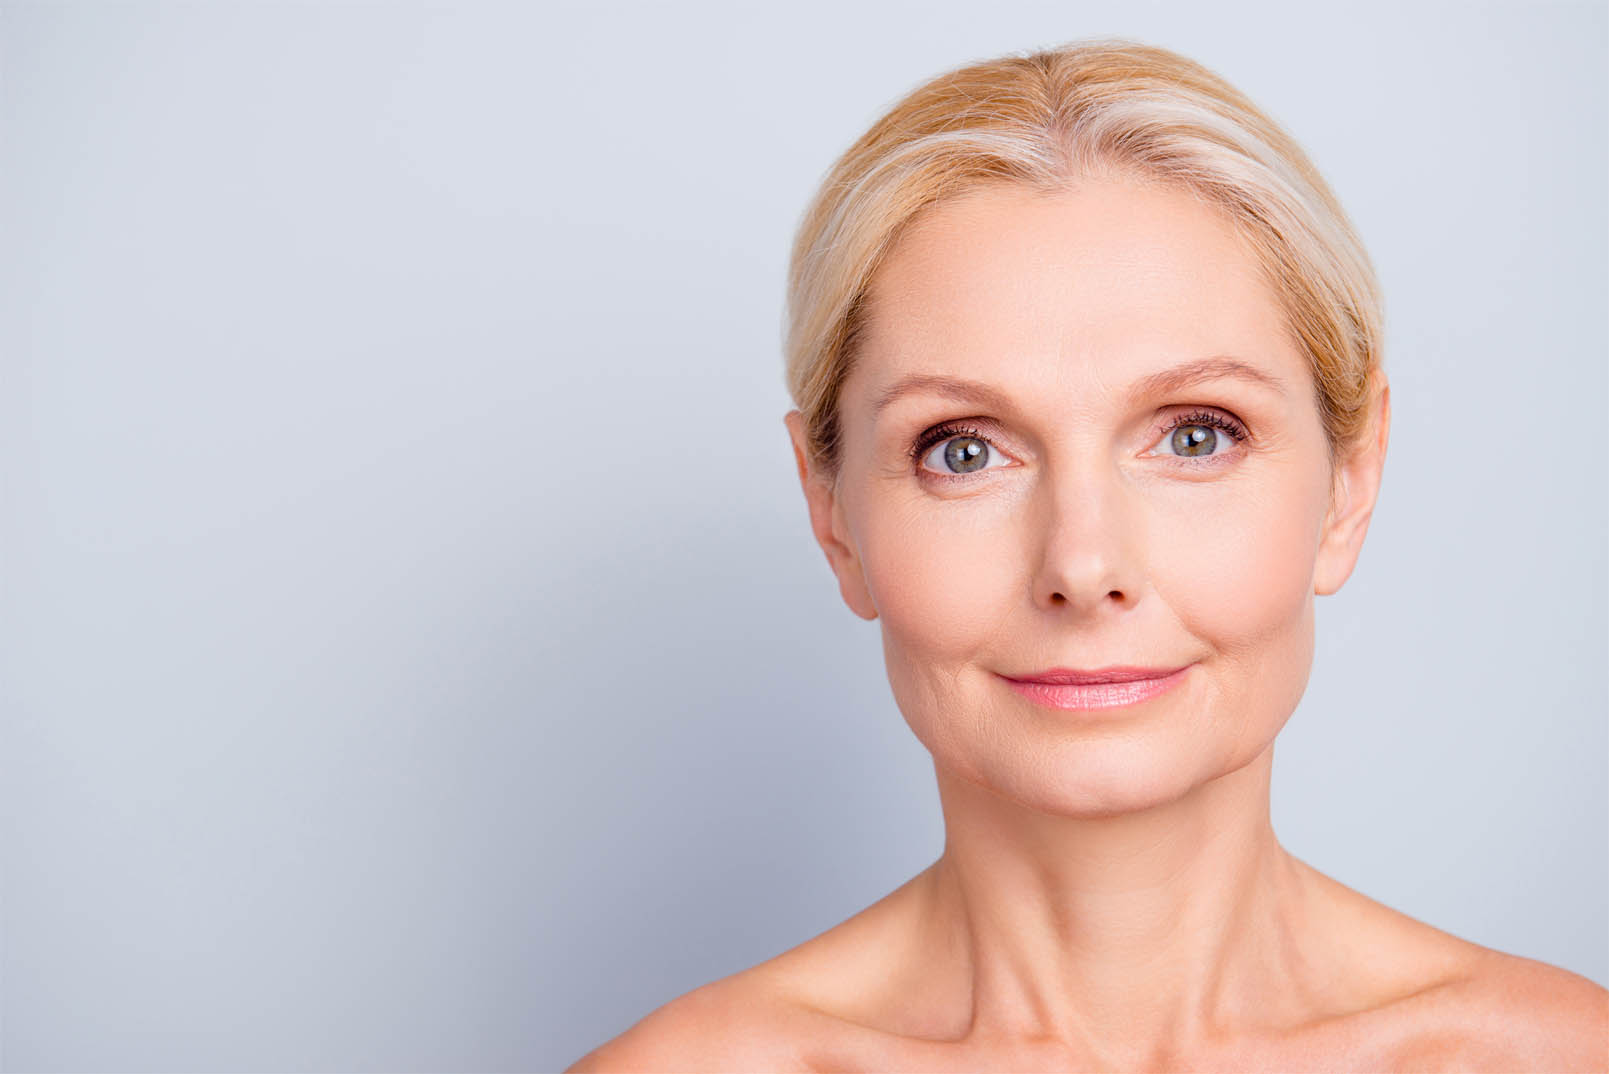 Remove your double chin with Kybella